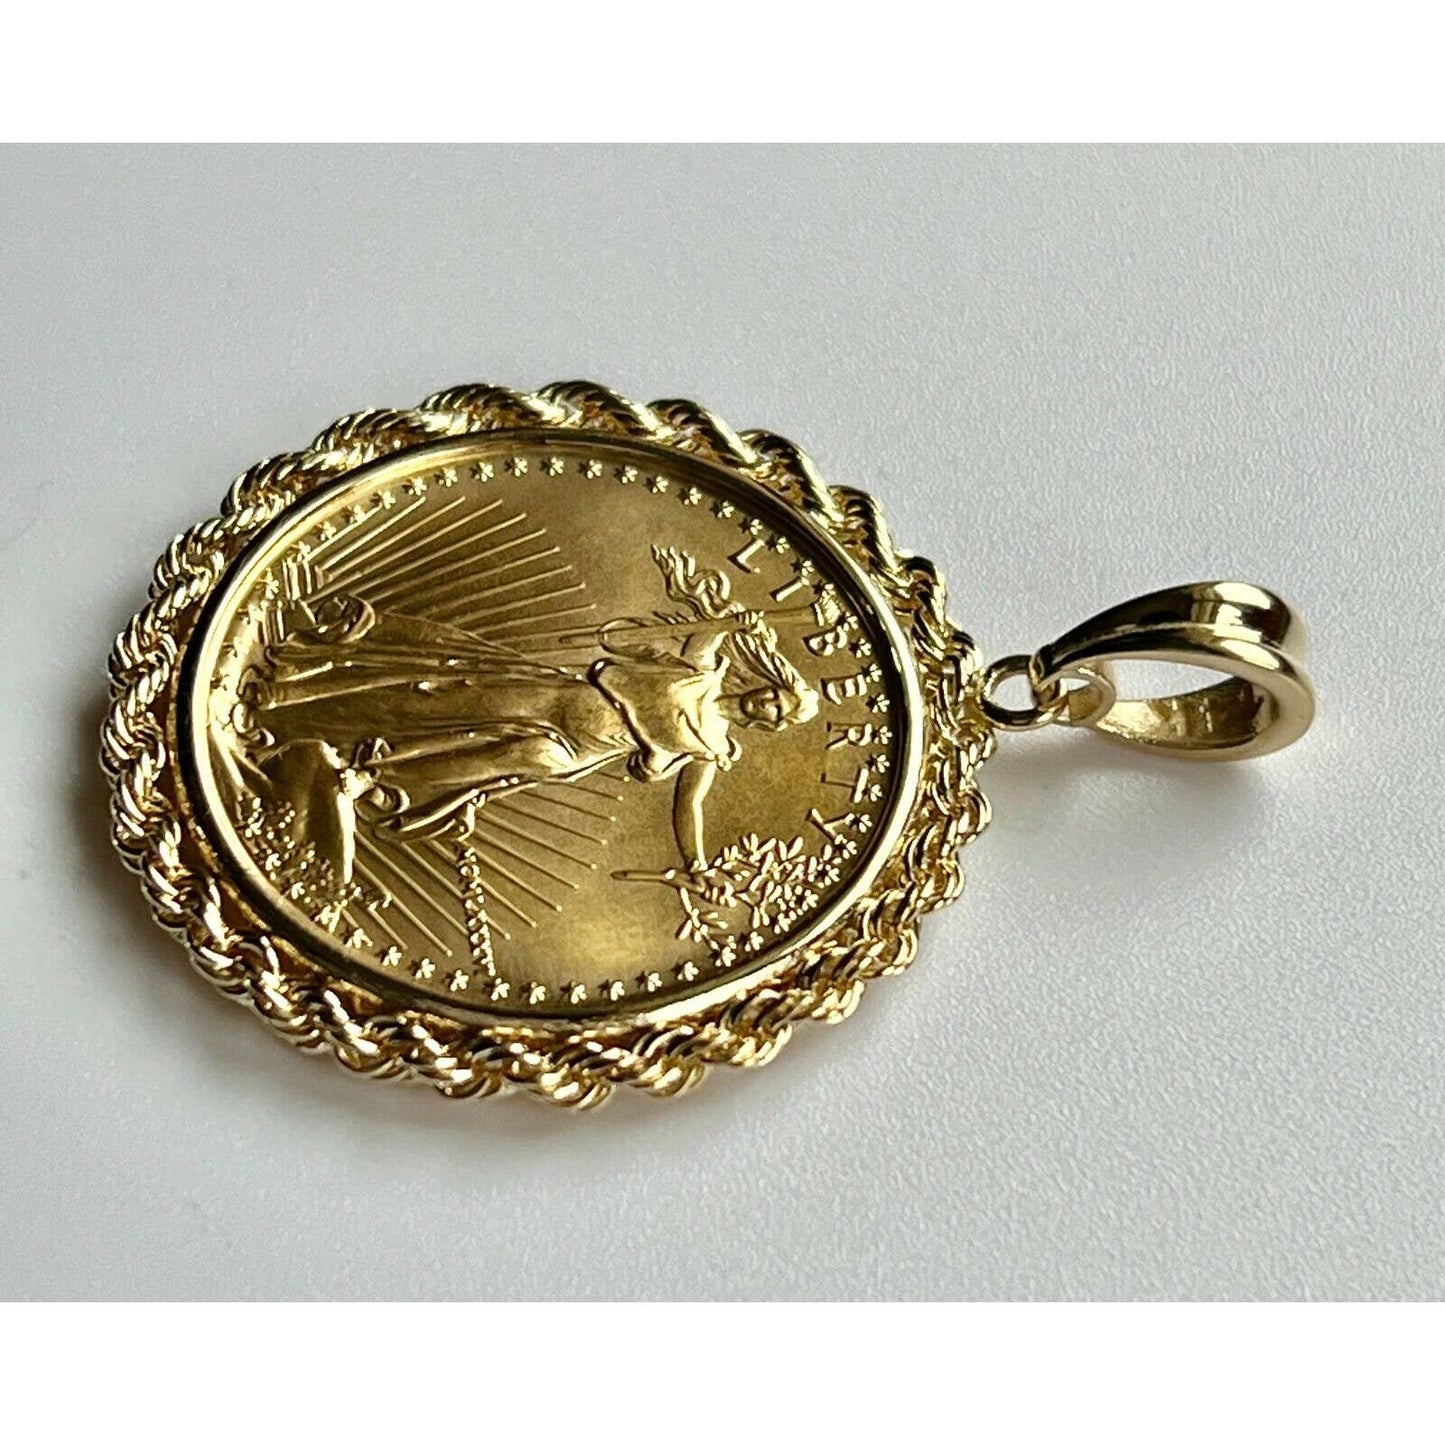 22k gold American Eagle 1/2 ounce coin mounted in 14k gold coin bezel